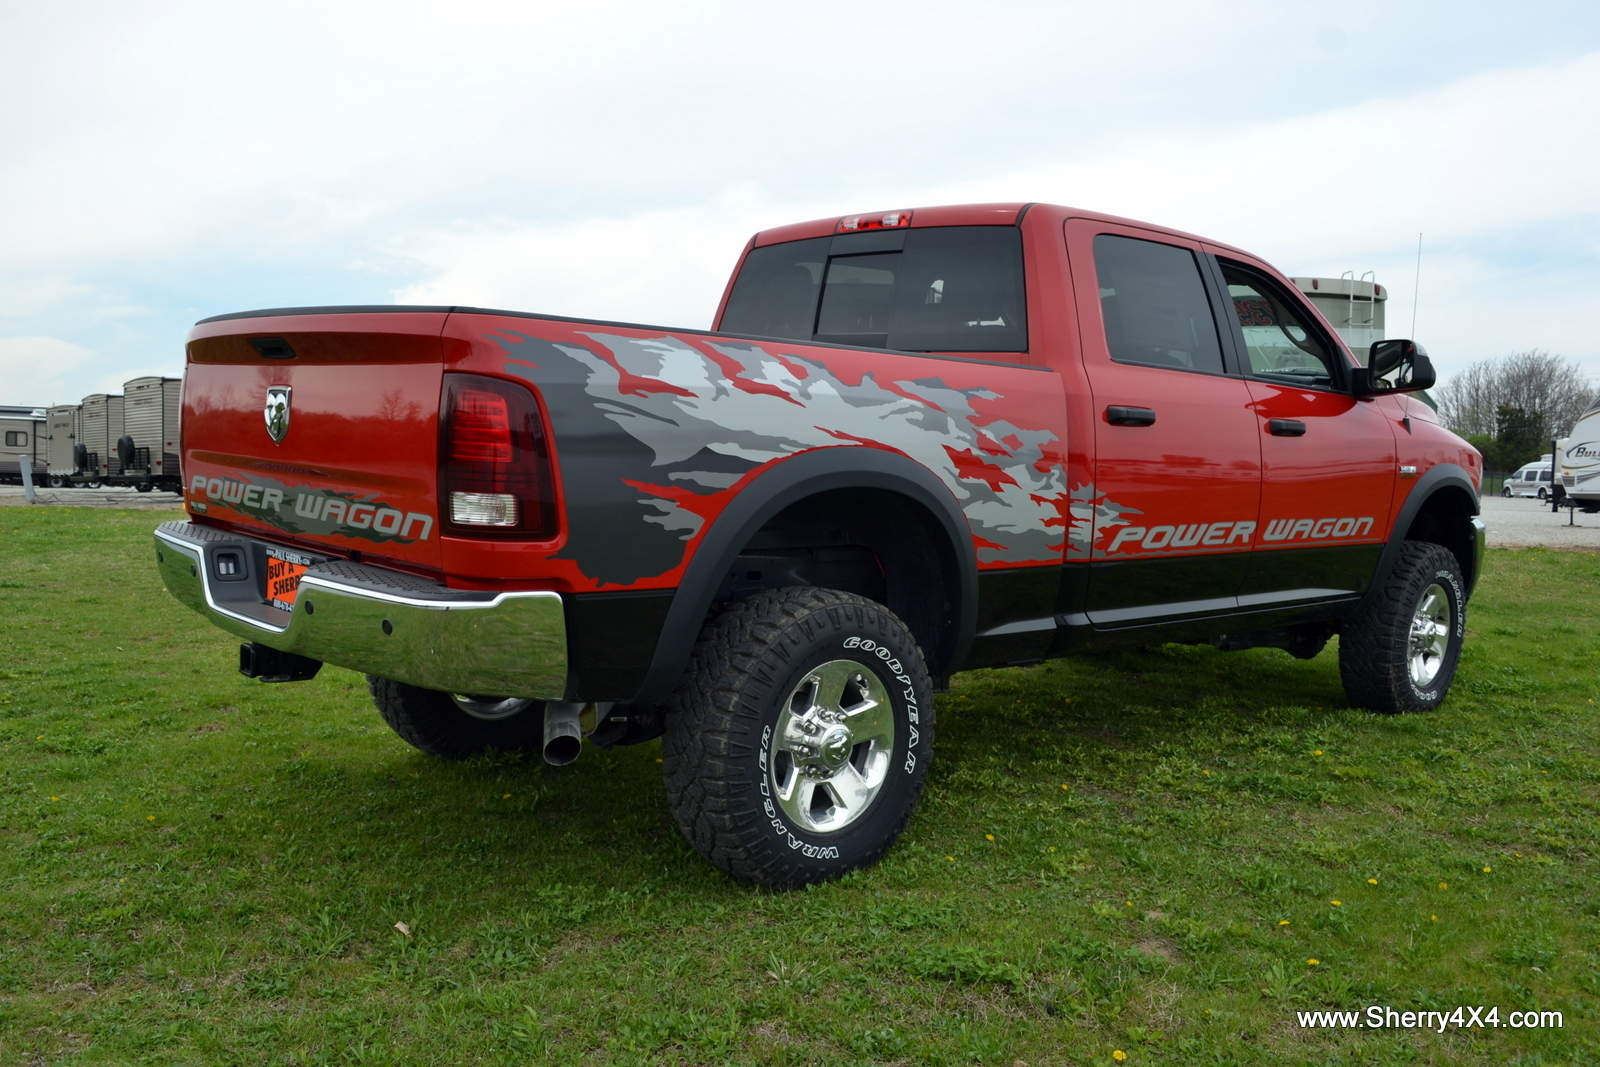 Ram Power Wagon Forsale | 2017 - 2018 Best Cars Reviews